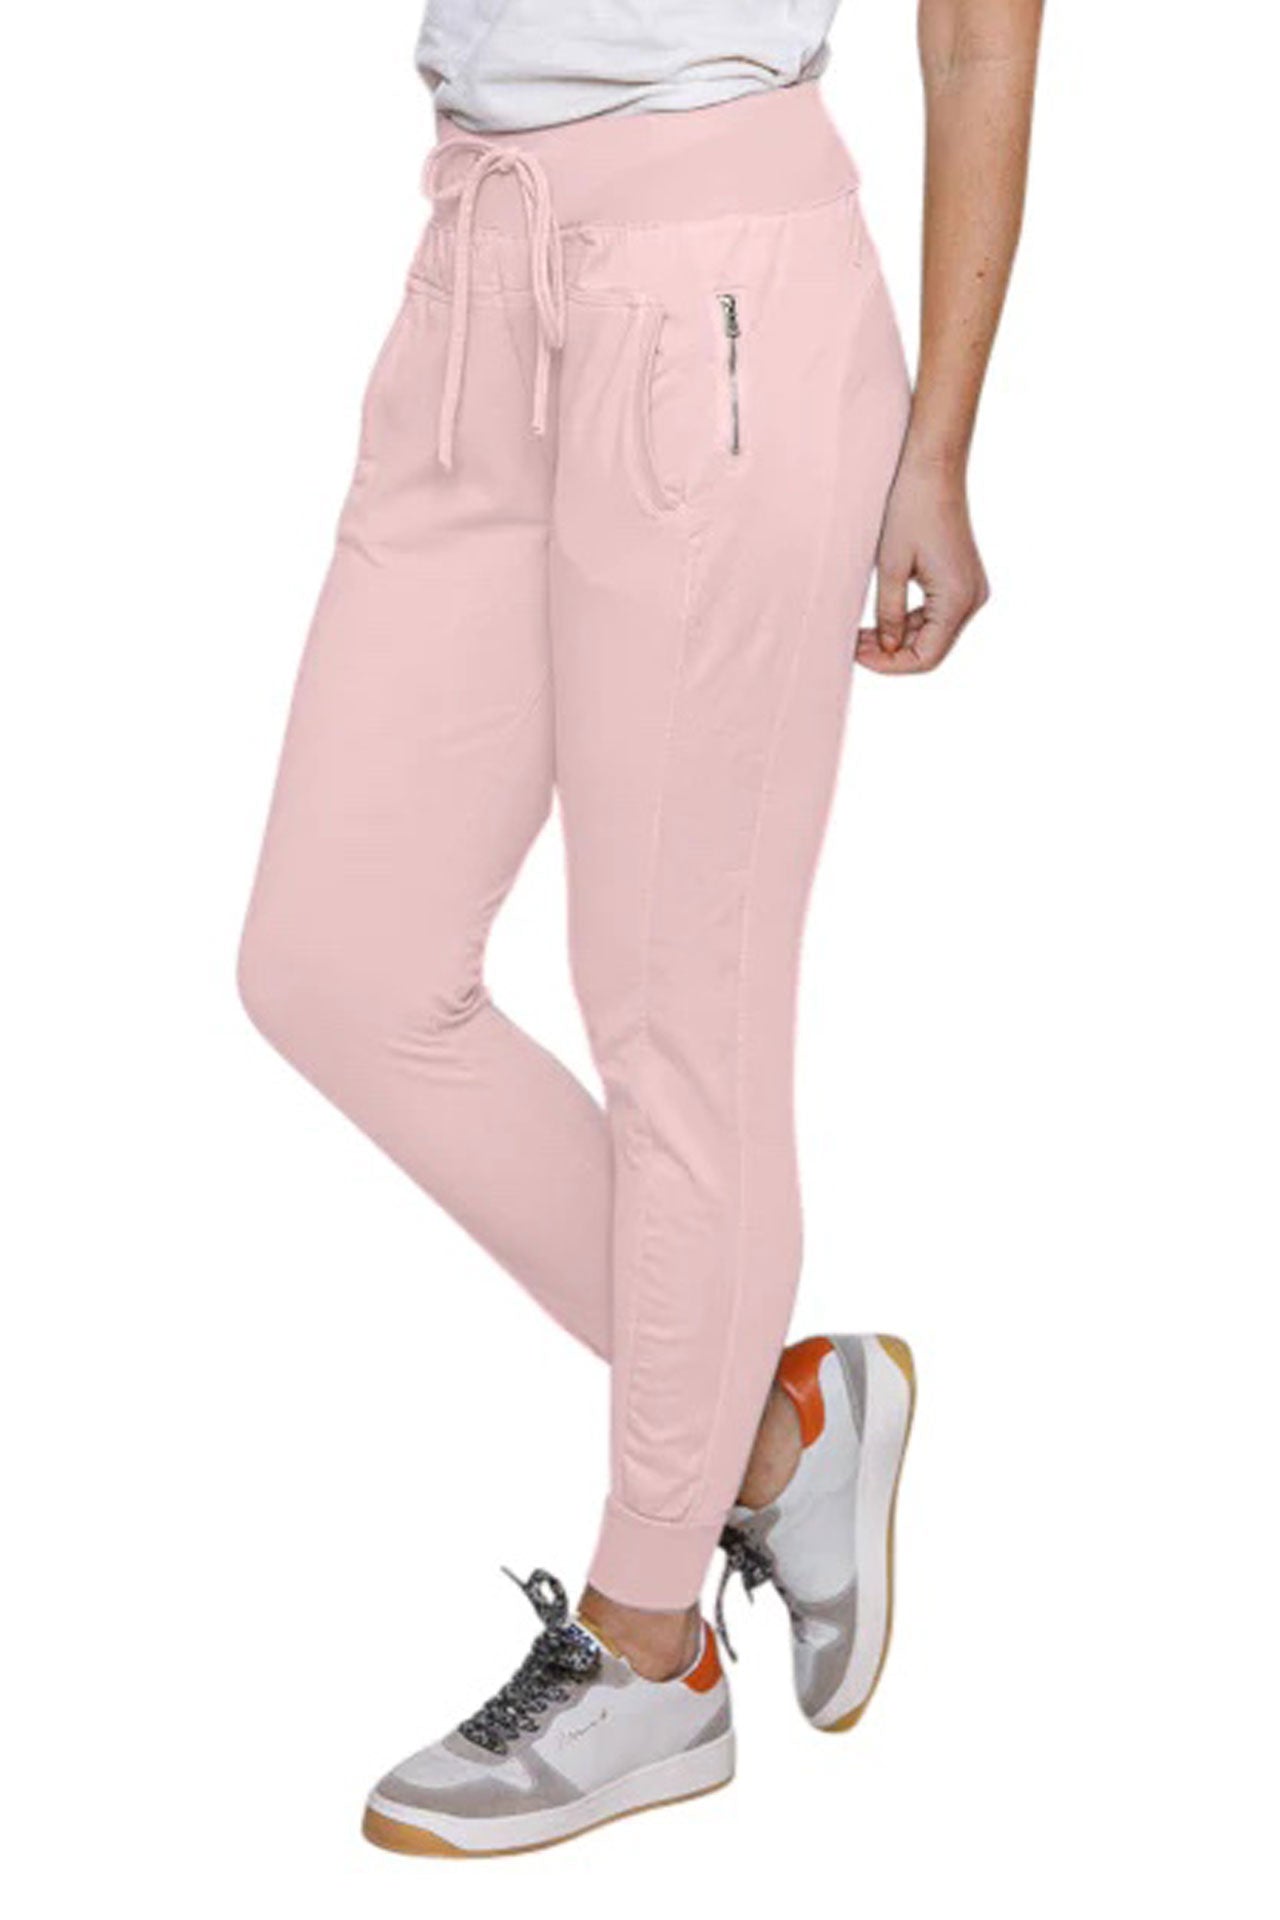 Suzy D Ultimate Joggers Cotton Joggers  Soft Pink, Made in Italy – Twang &  Pearl